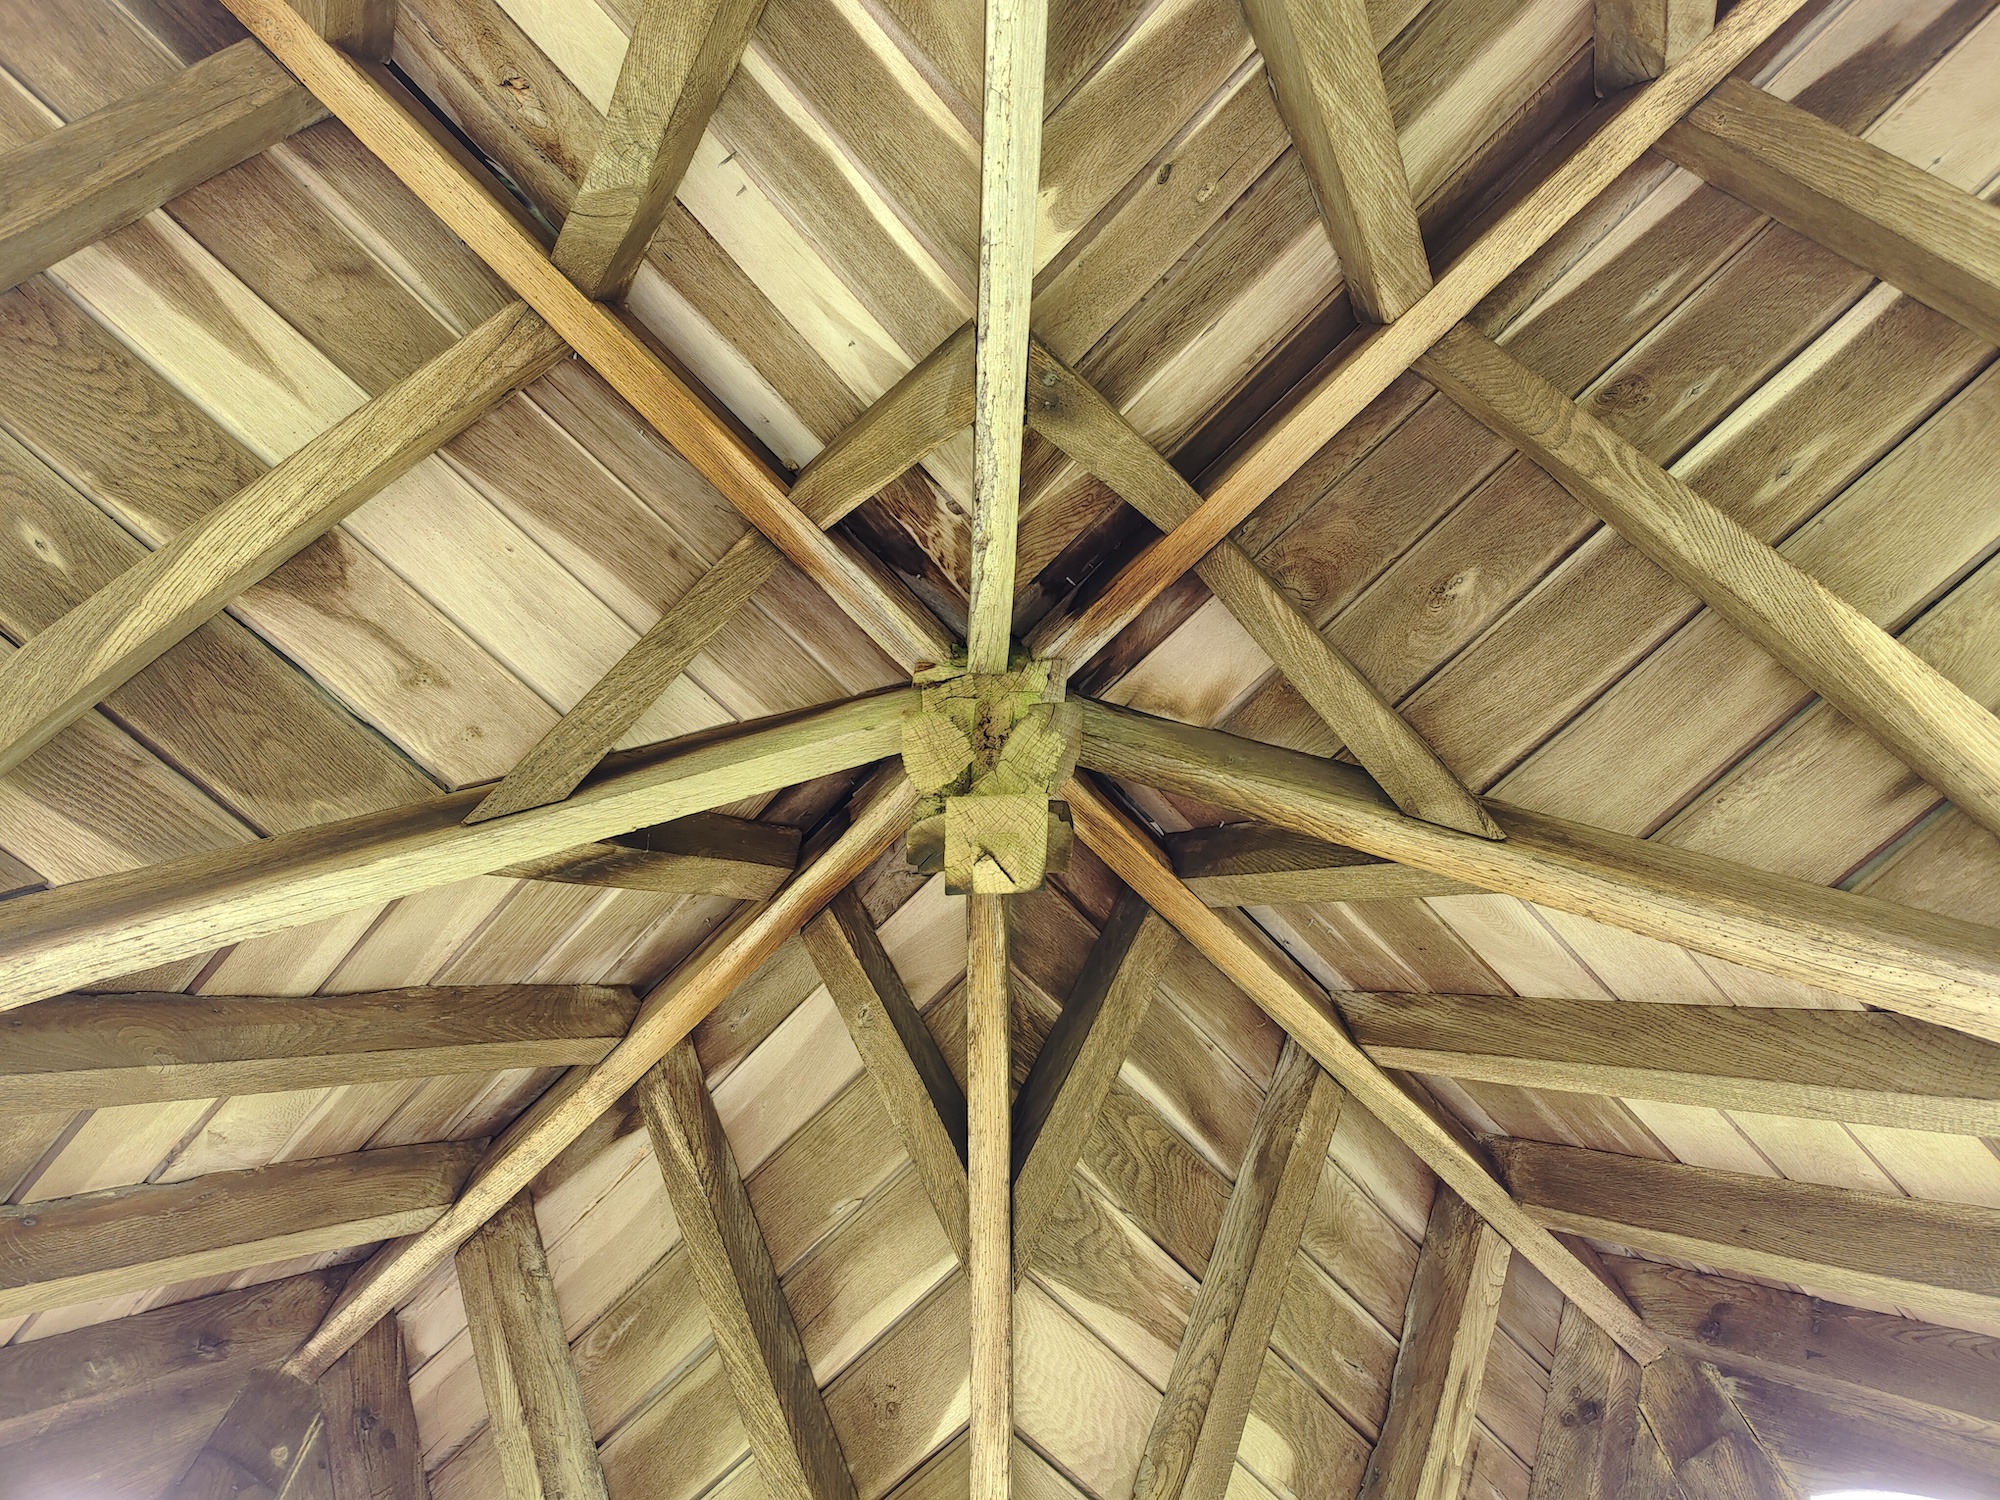 Photo of a wooden roof taken with the Vivo X70 Pro+.